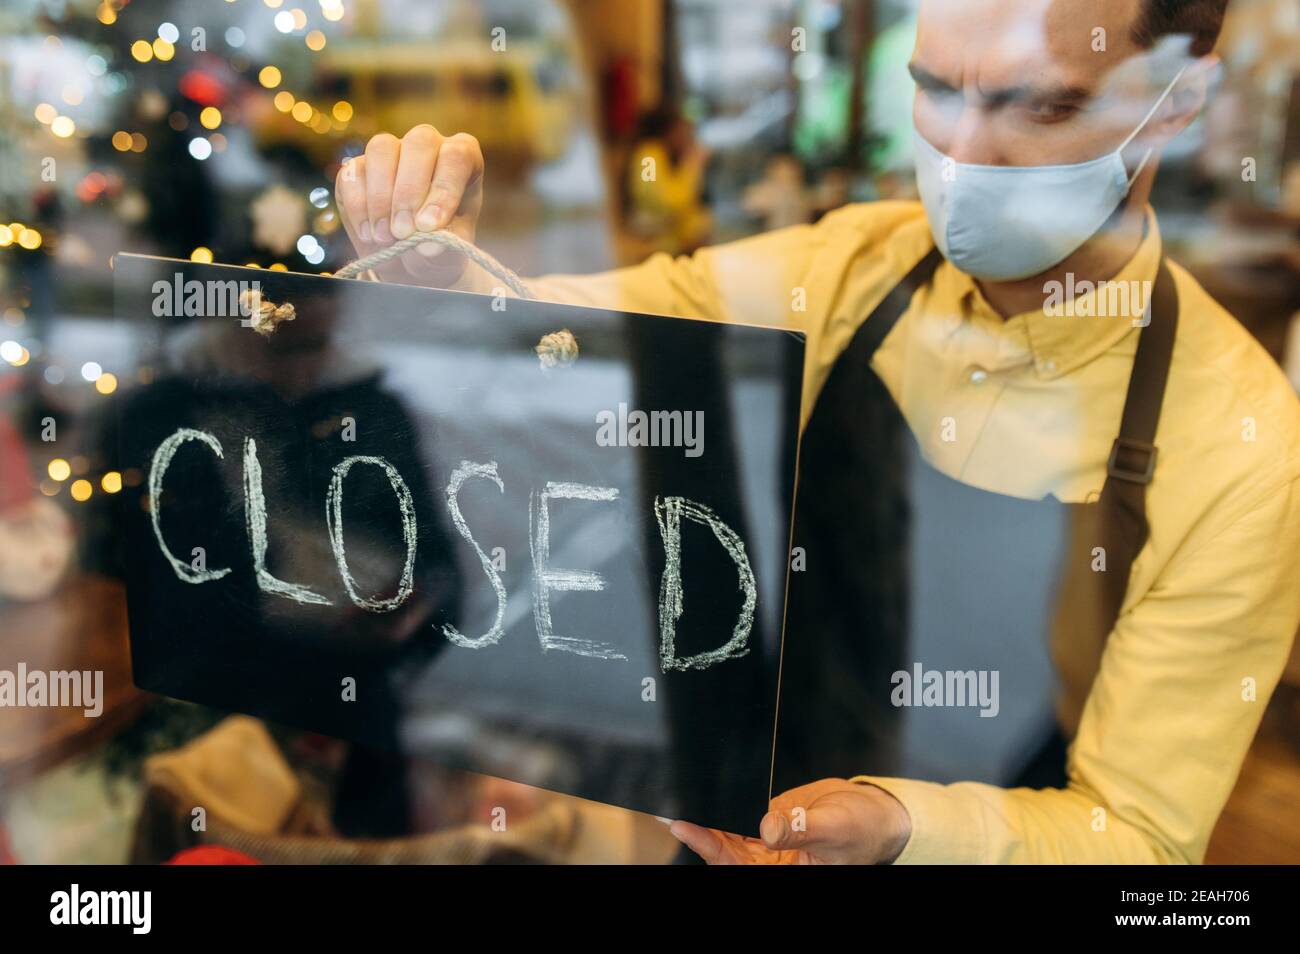 CLOSED. Sad waiter, barista or small business owner wearing a medical protective mask hangs up a CLOSED sign at the entrance to a cafe, restaurant or bar Stock Photo